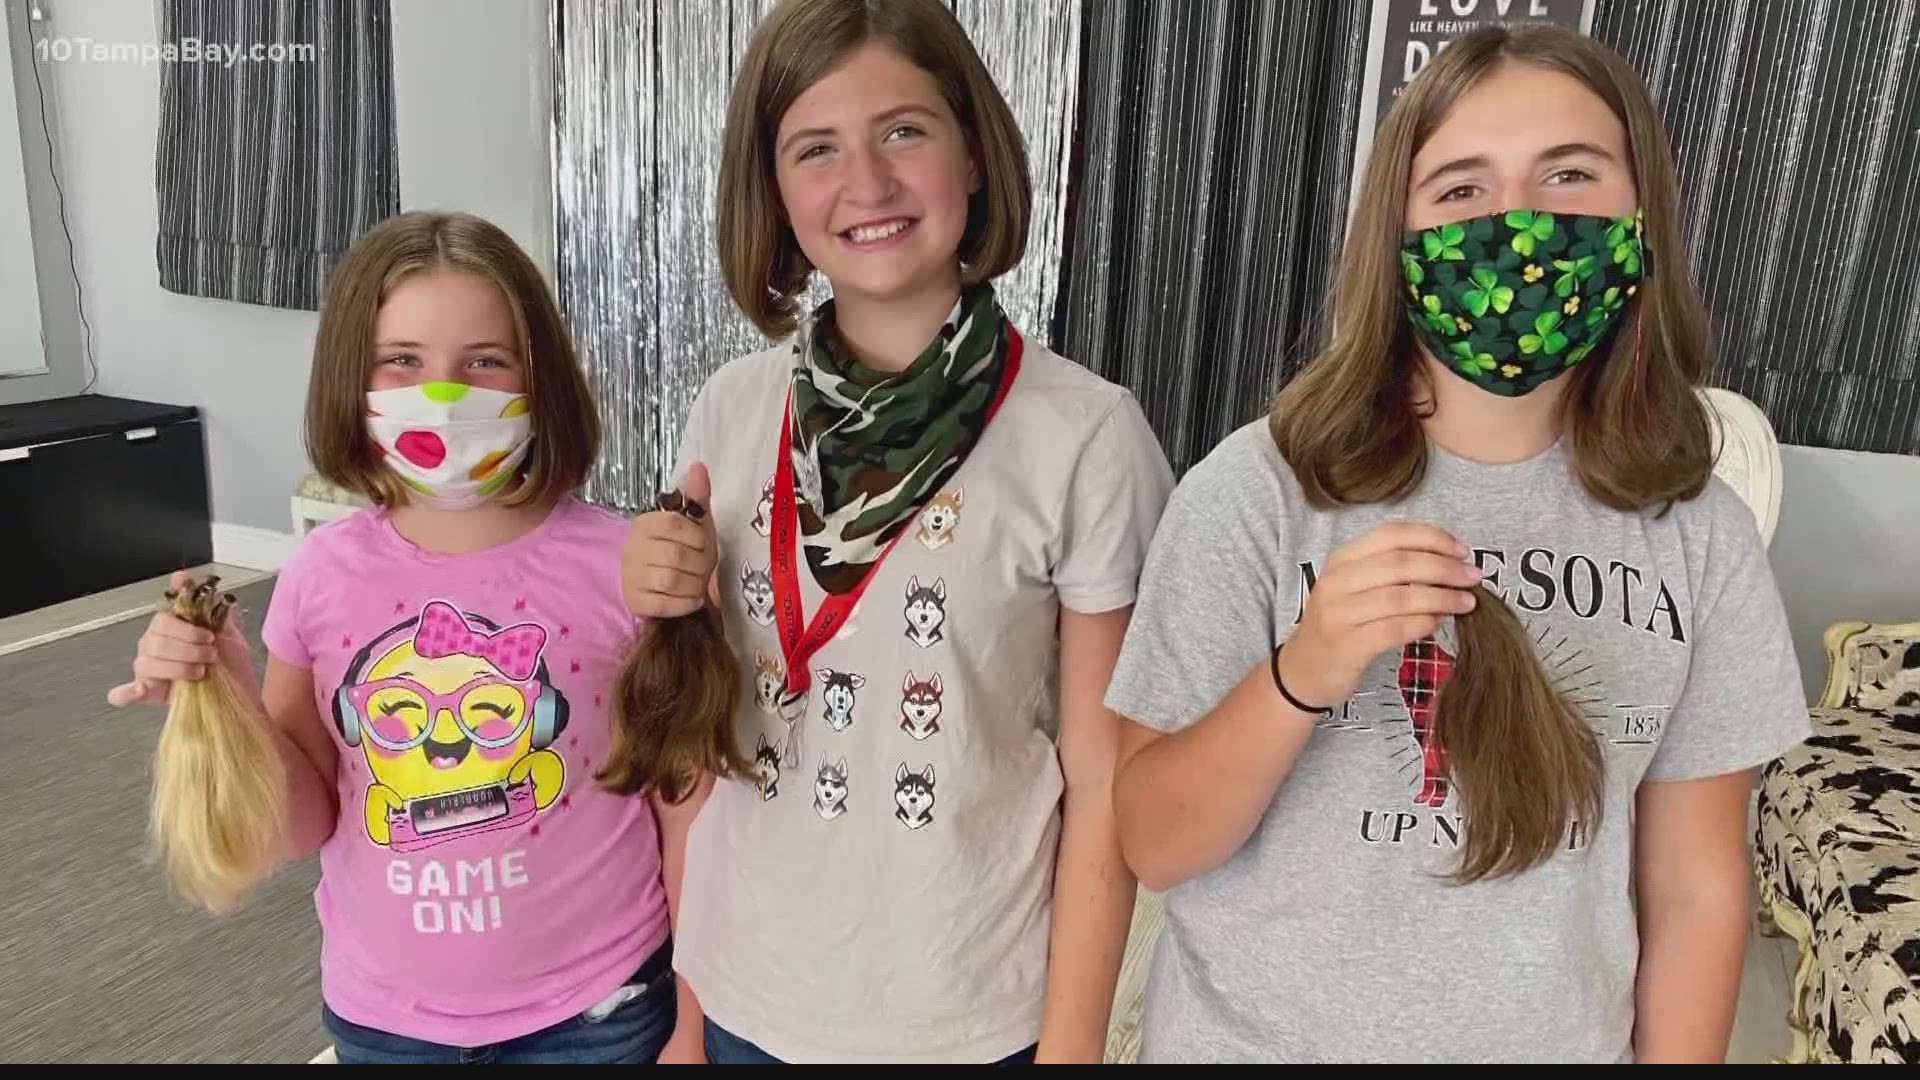 Lydia, Holly, and Etta each gave eight inches of hair at LaDee-Da Kids Spa last weekend. Their hair will go to a nonprofit making wigs for kids losing their hair